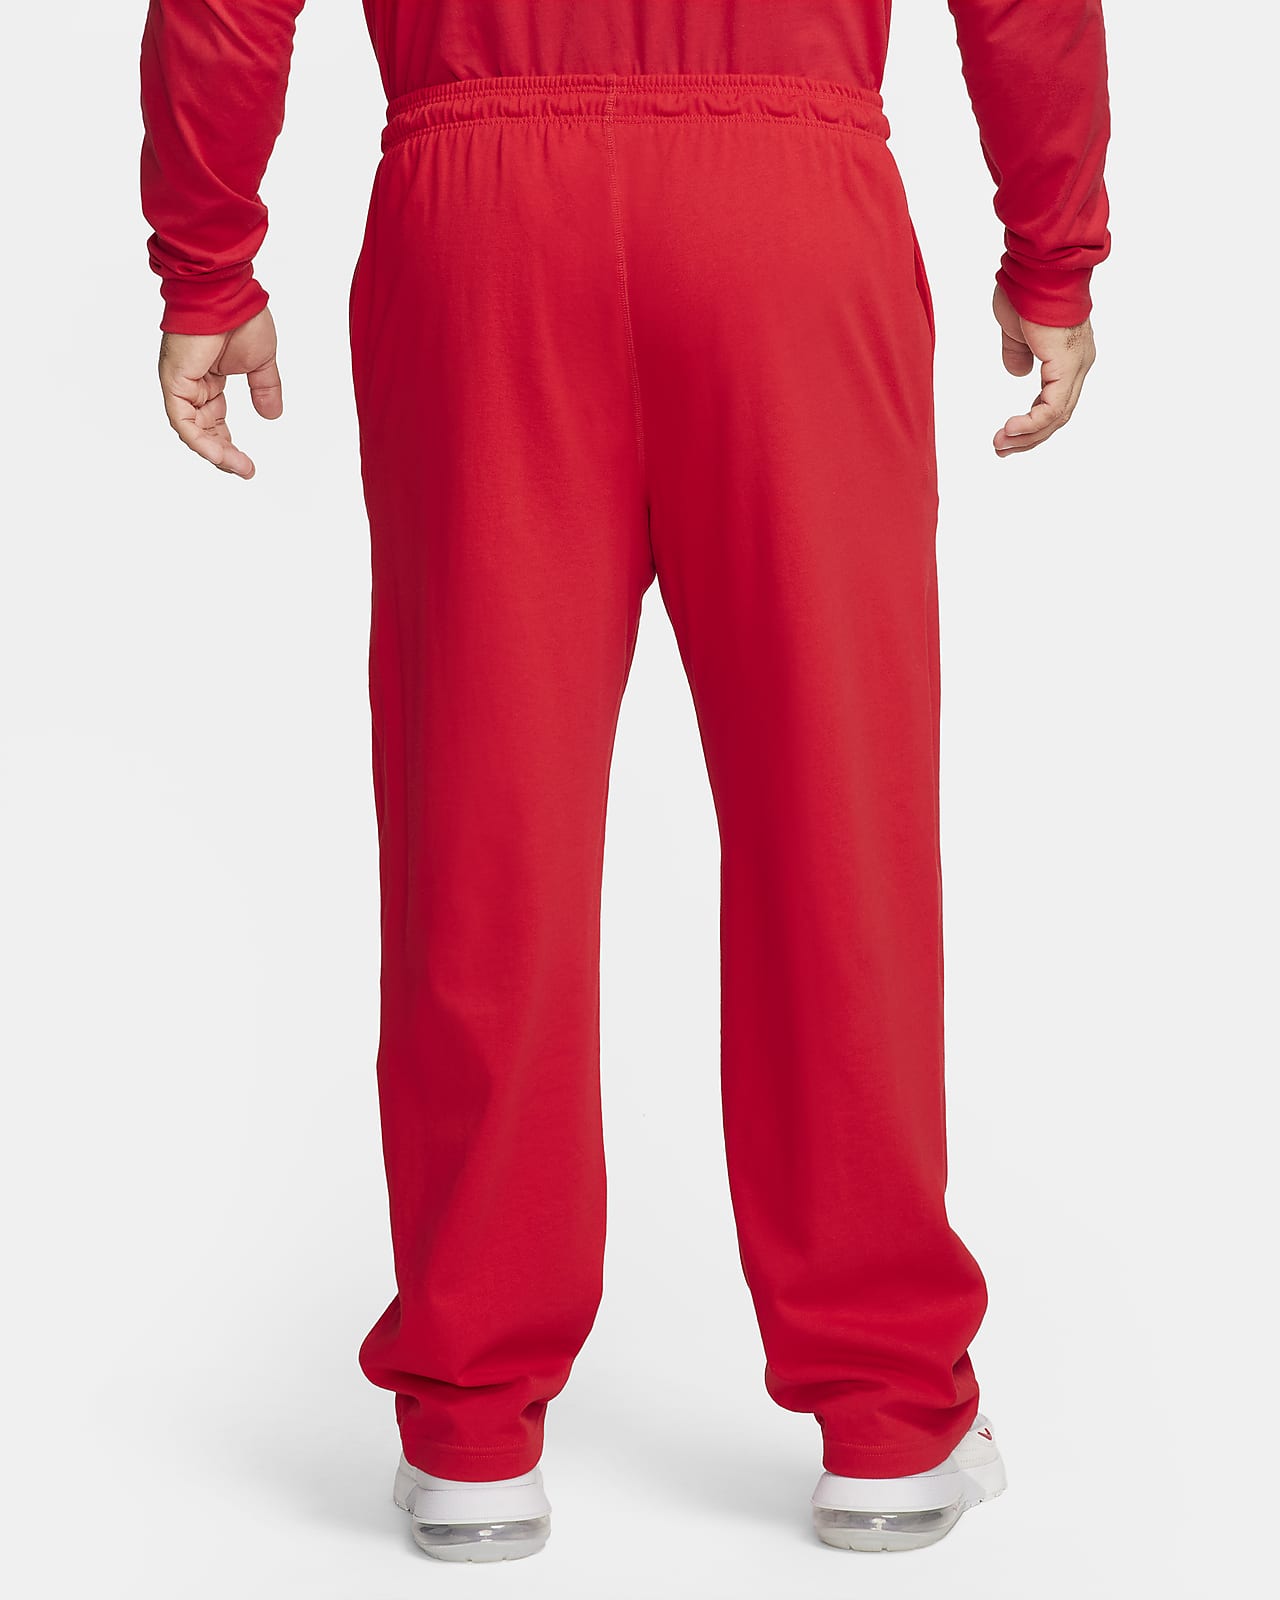 Nike Sportswear CLUB PANT - Tracksuit bottoms - university red/red